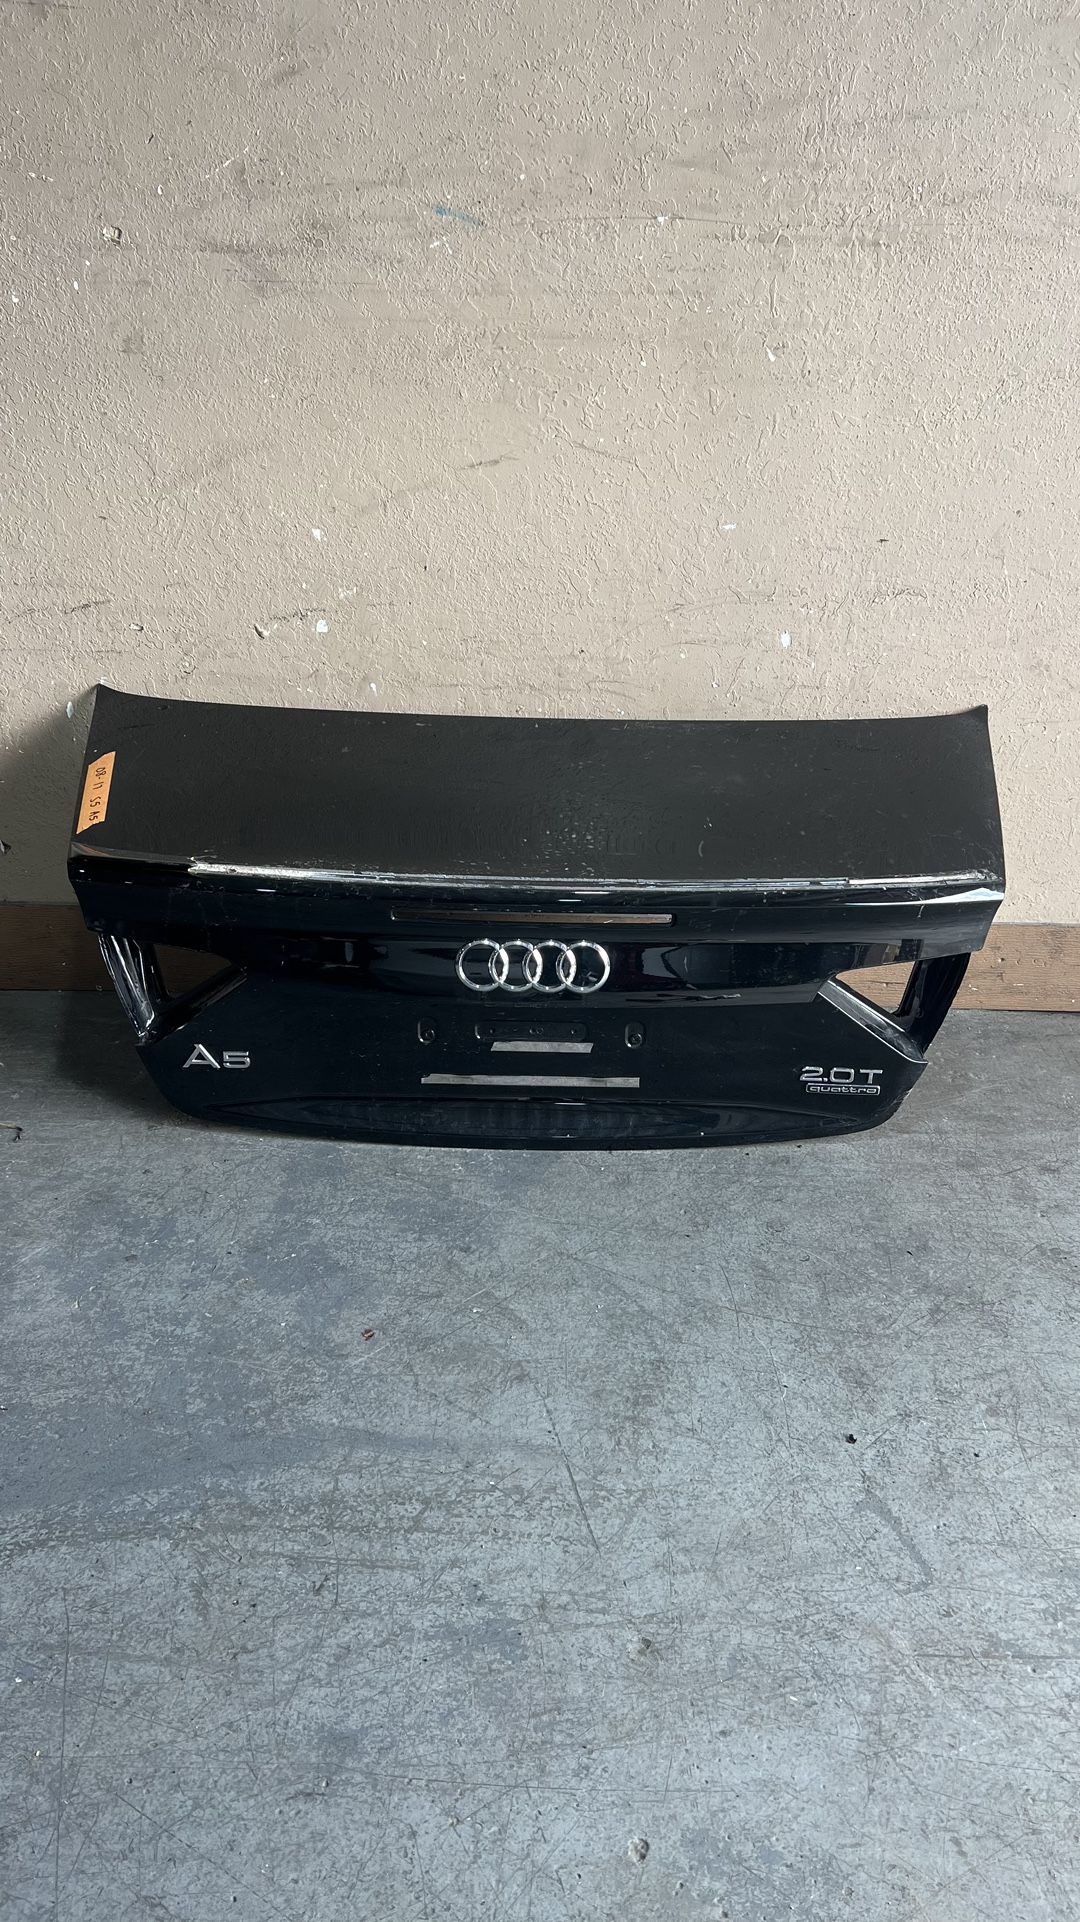 08-17 Audi S5 A5 Trunk Lid Taillid Tailgate Liftgate Tail Lid Lift Hatch Tapa Trasera Parts Part 2017 2016 2015 2014 2013 2012 2011 2010 2009 2008